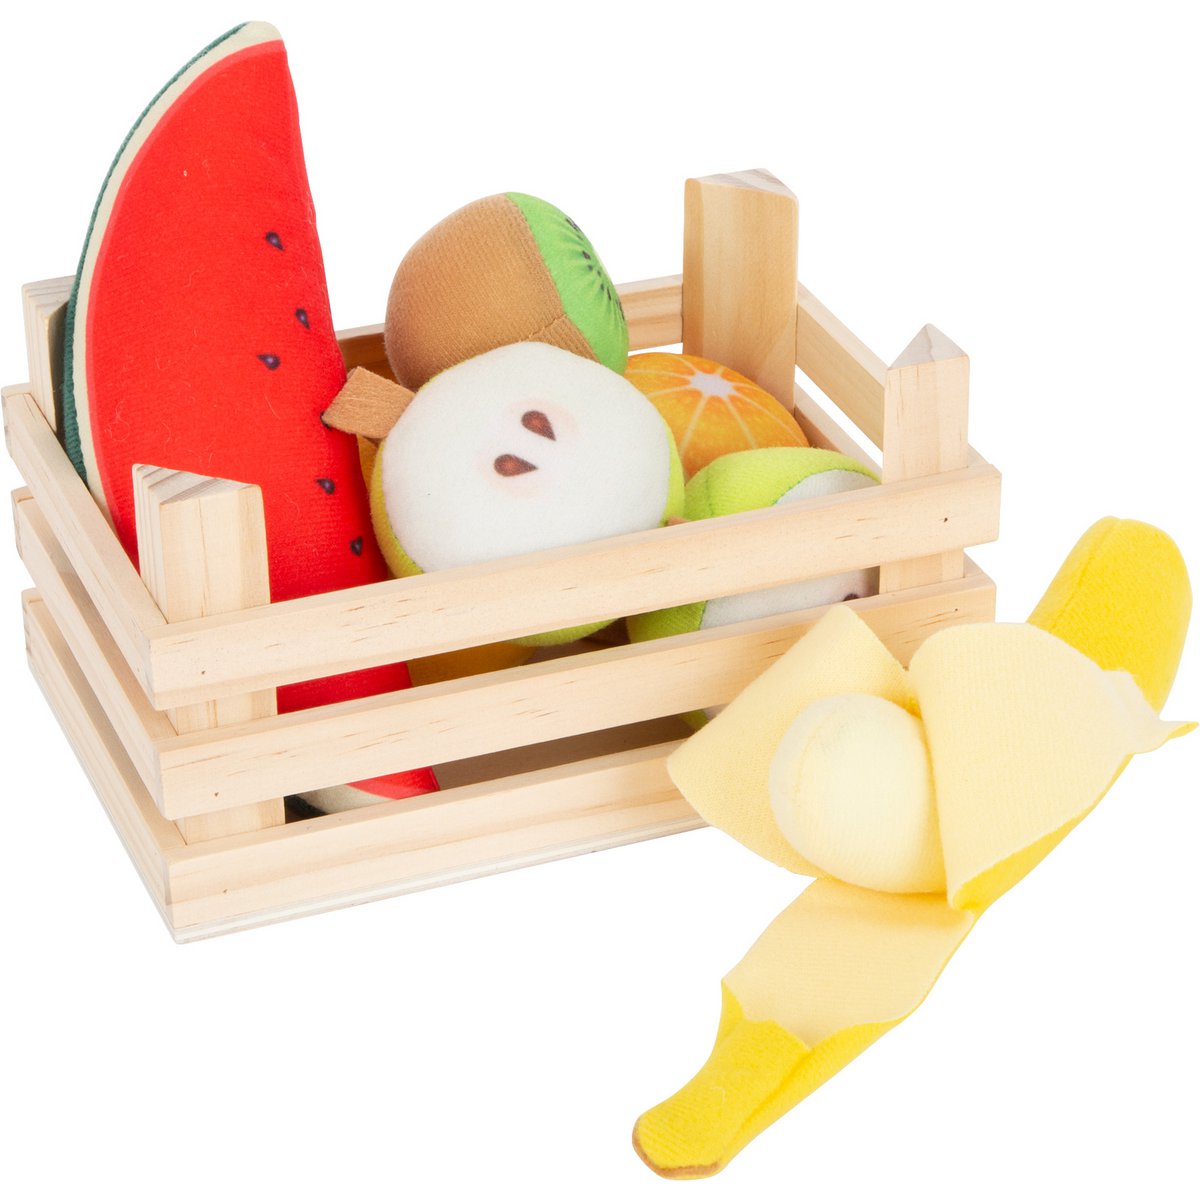 Fabric Fruit Set in a Wooden Crate